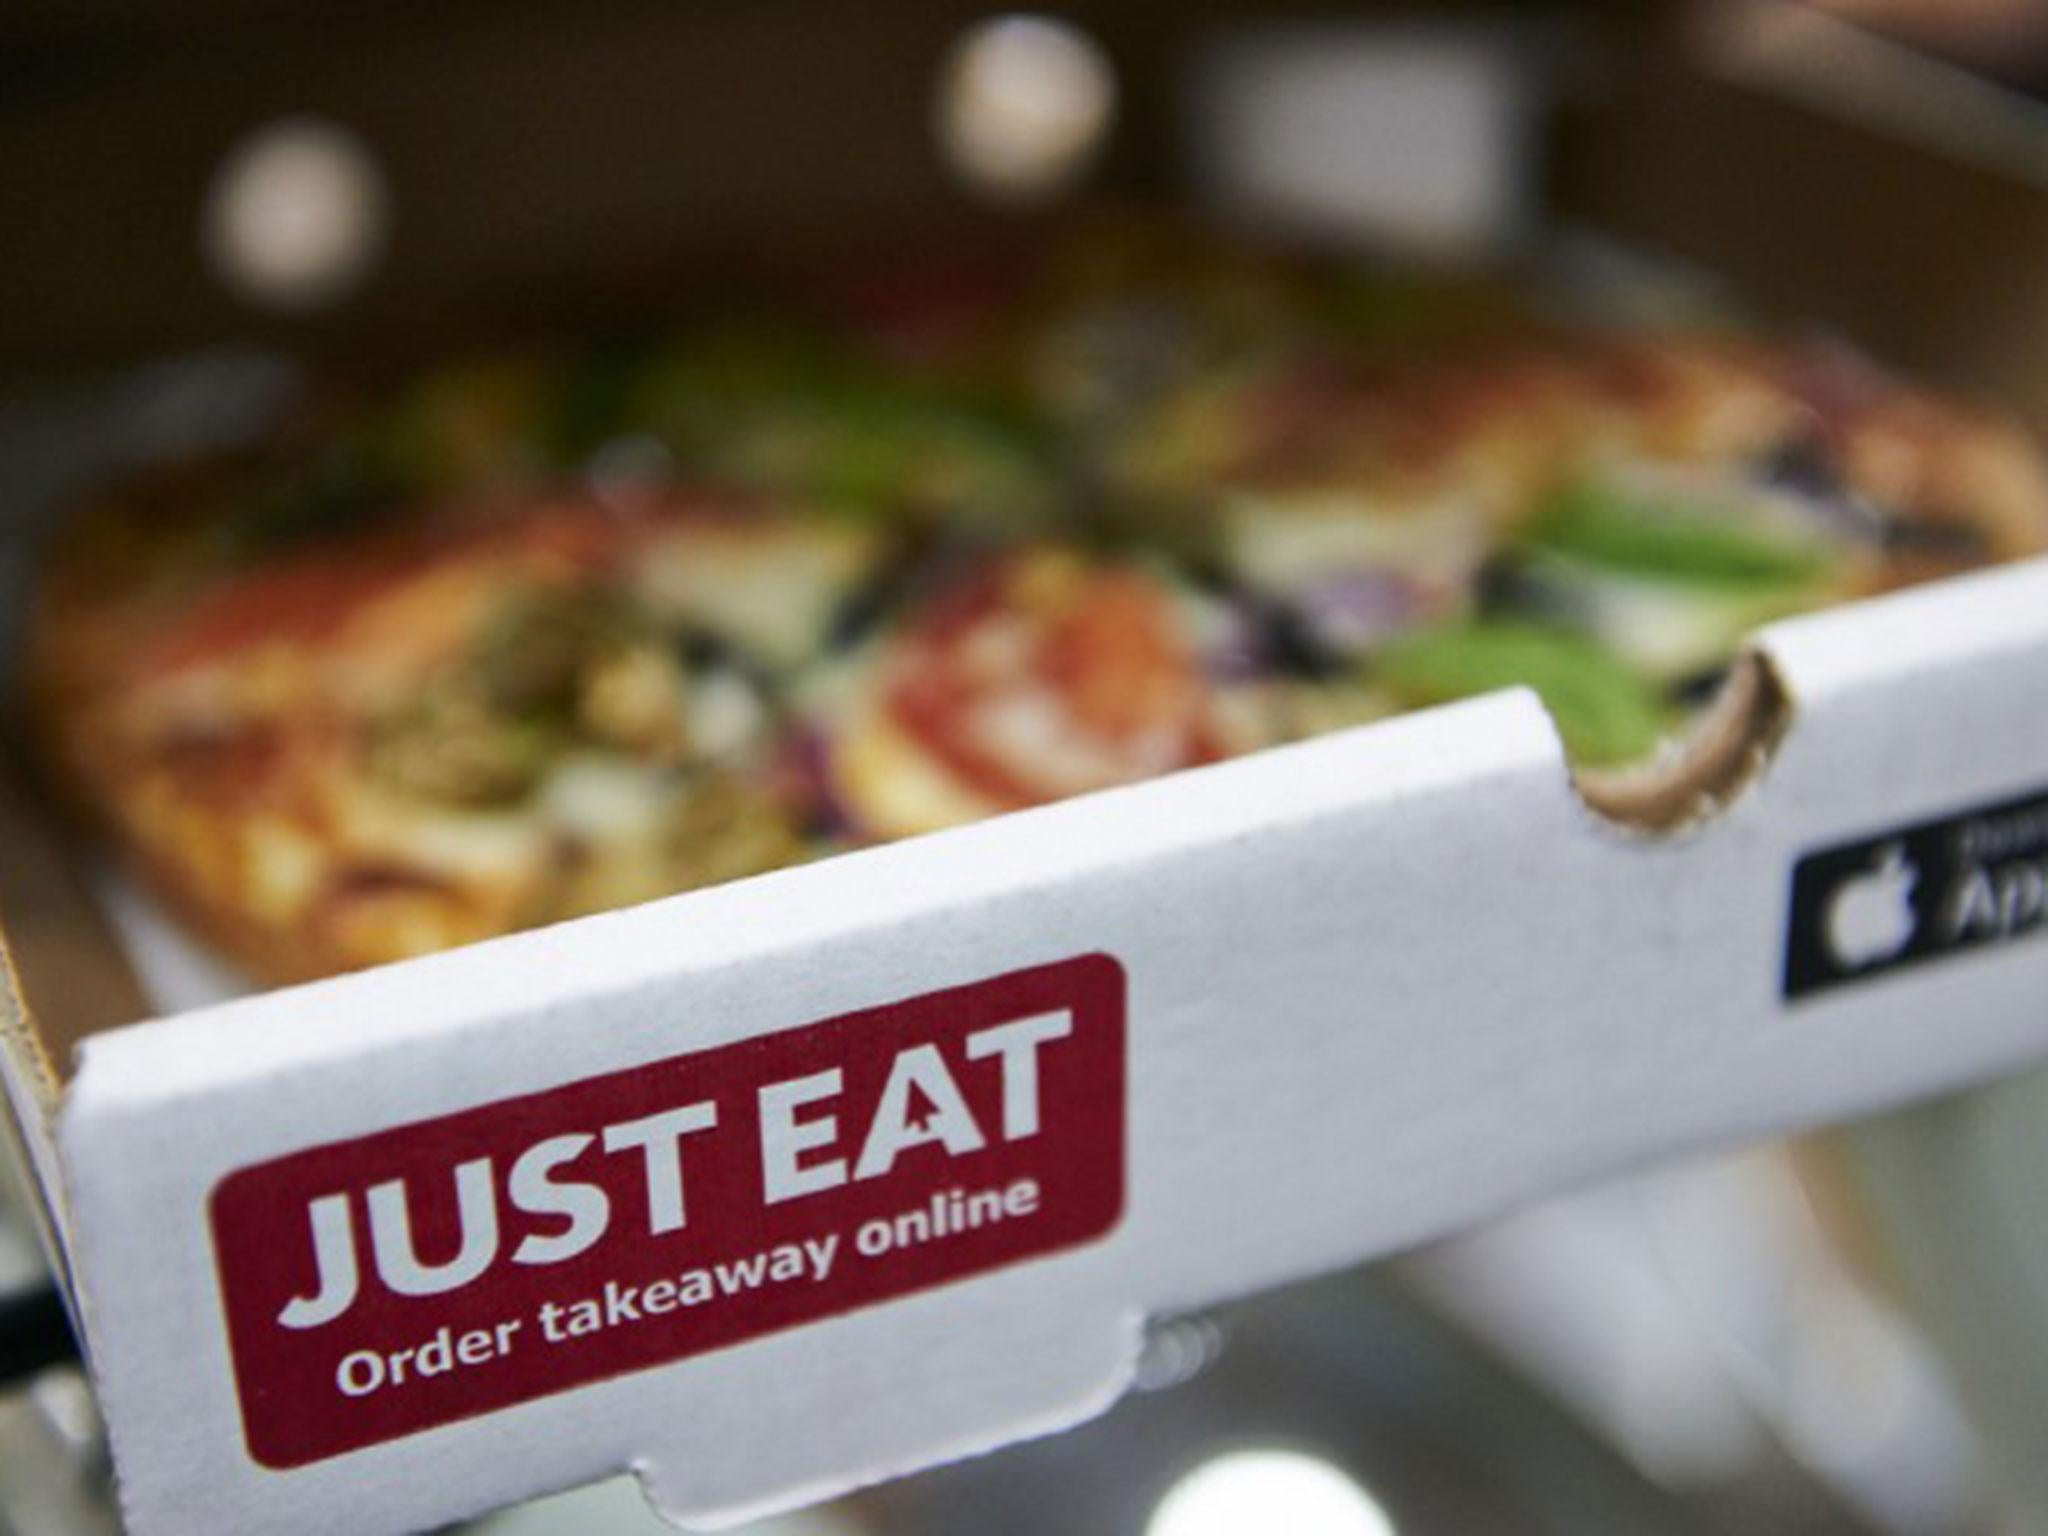 Just Eat faces a competition investigation into its plan to merge with Hungryhouse